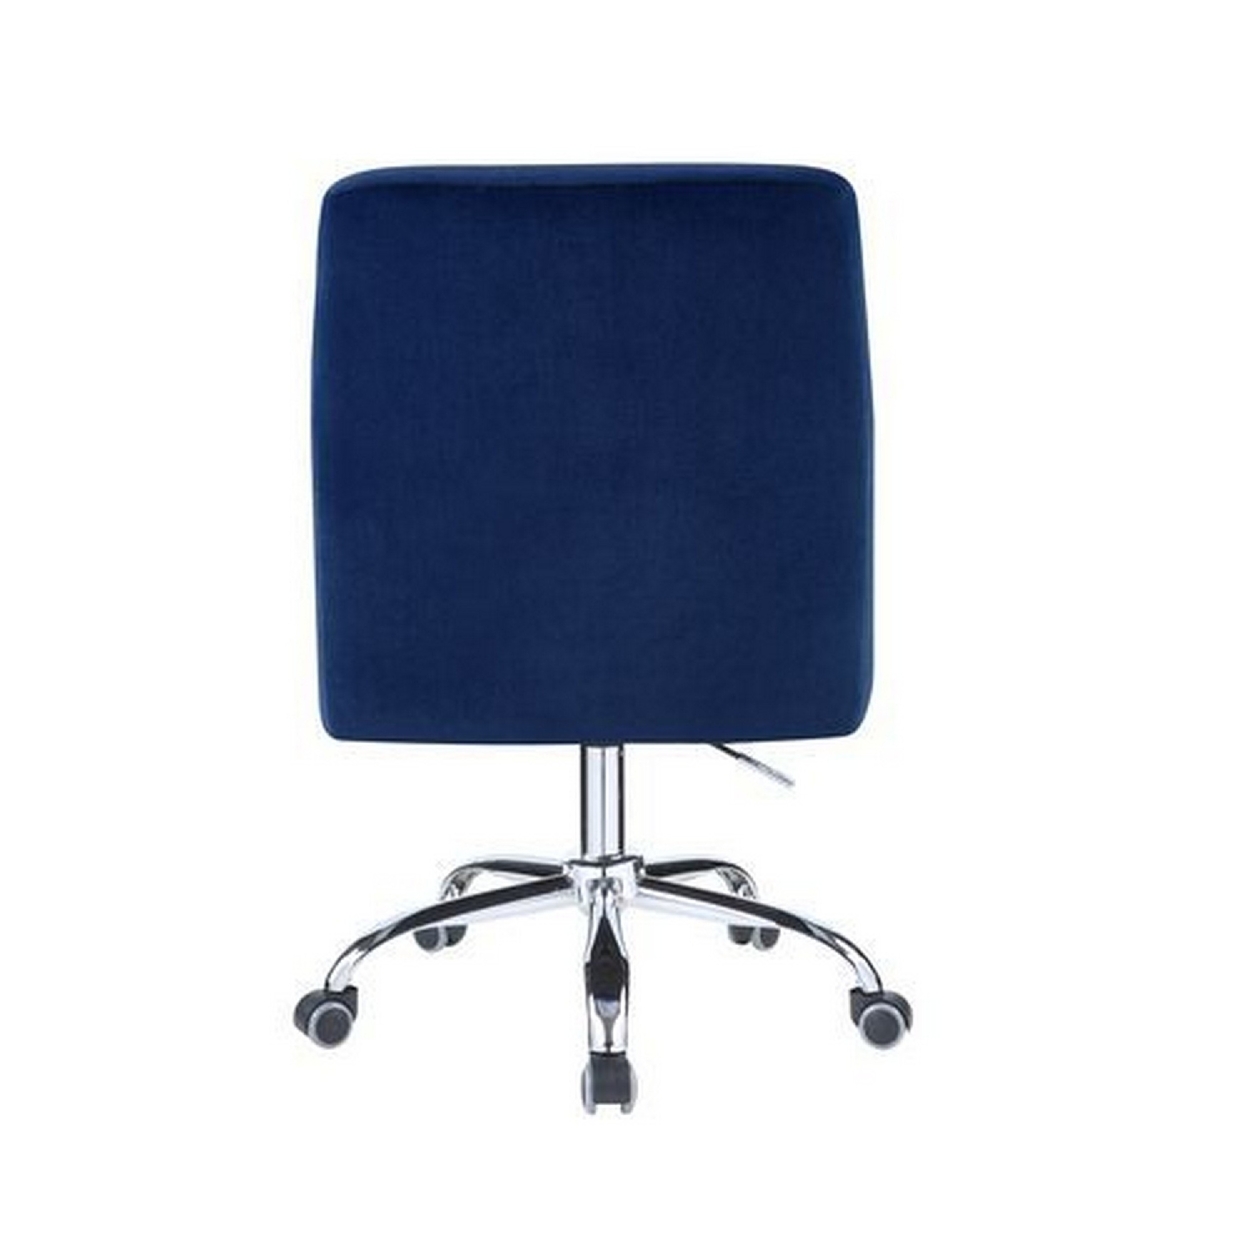 Swivel Office Chair With Sleek Track Arms And Nailhead Trim,Blue And Chrome- Saltoro Sherpi